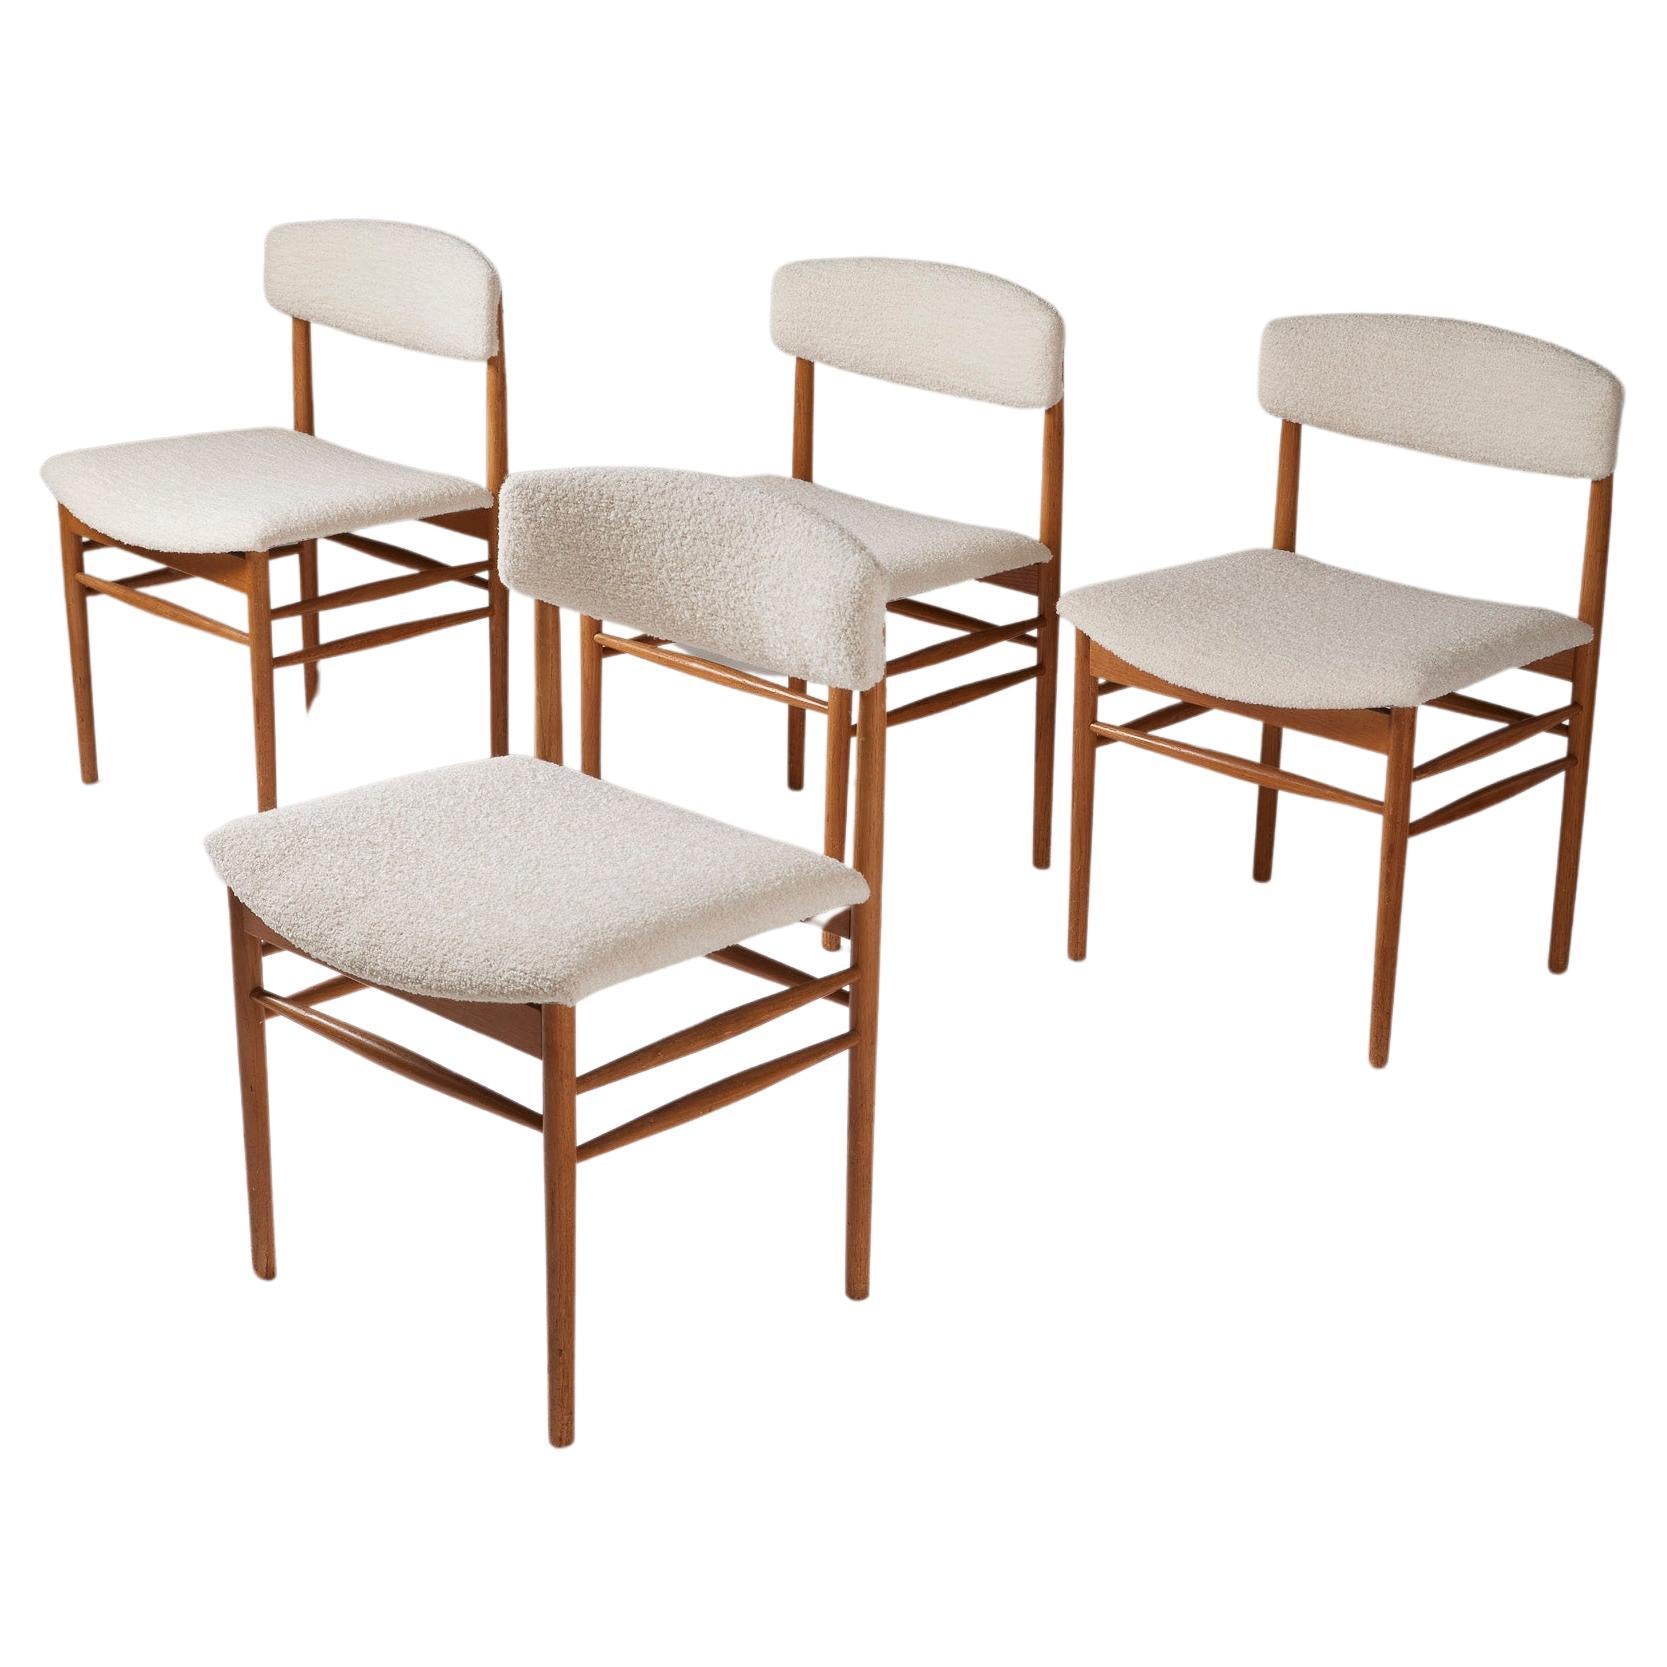  Set of 4 chairs in wood and bouclette